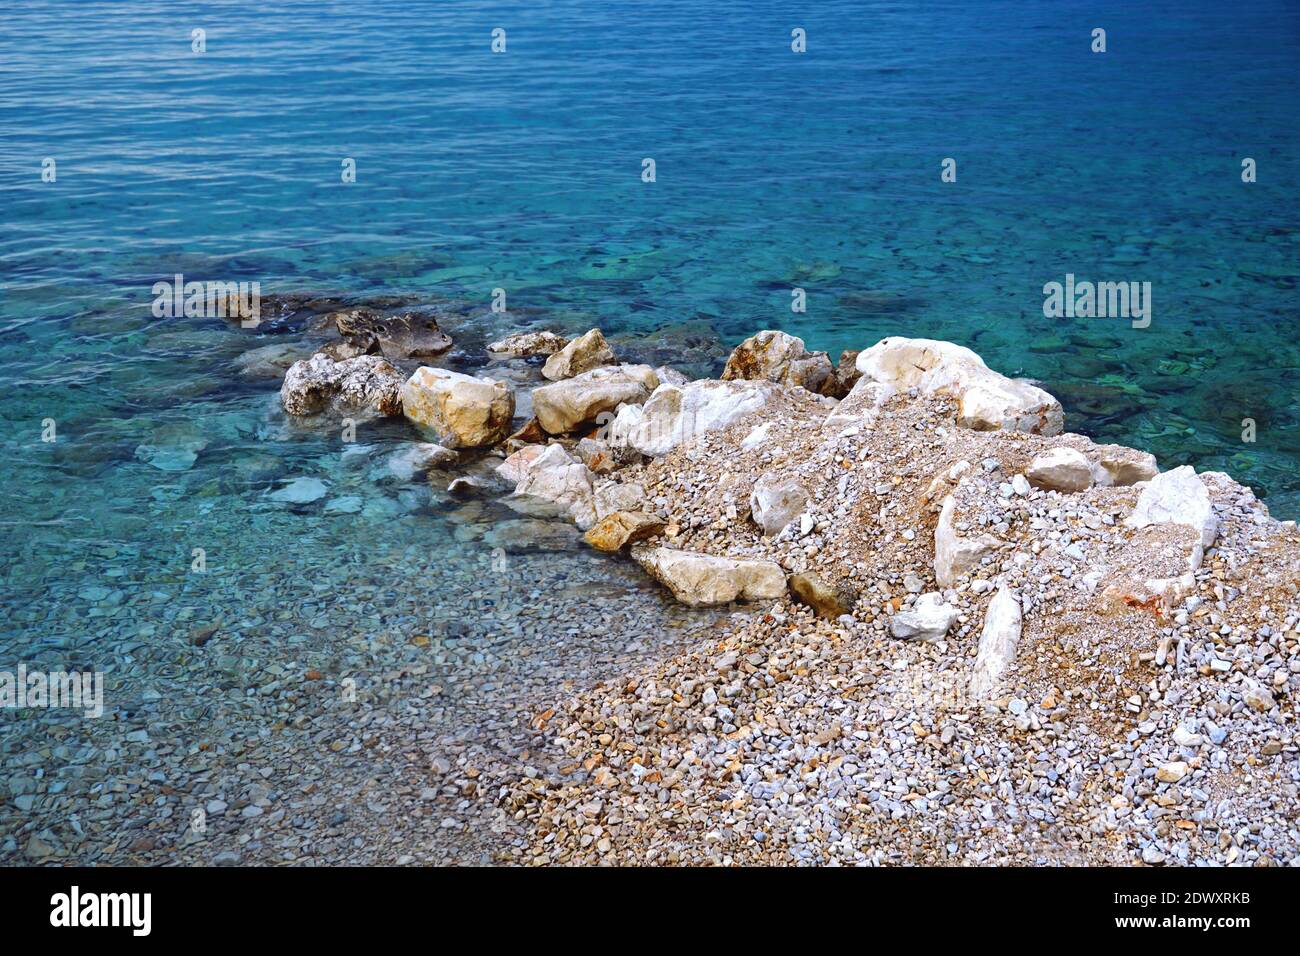 Stone reef and pebbles immersed in the clear blue sea water Stock Photo